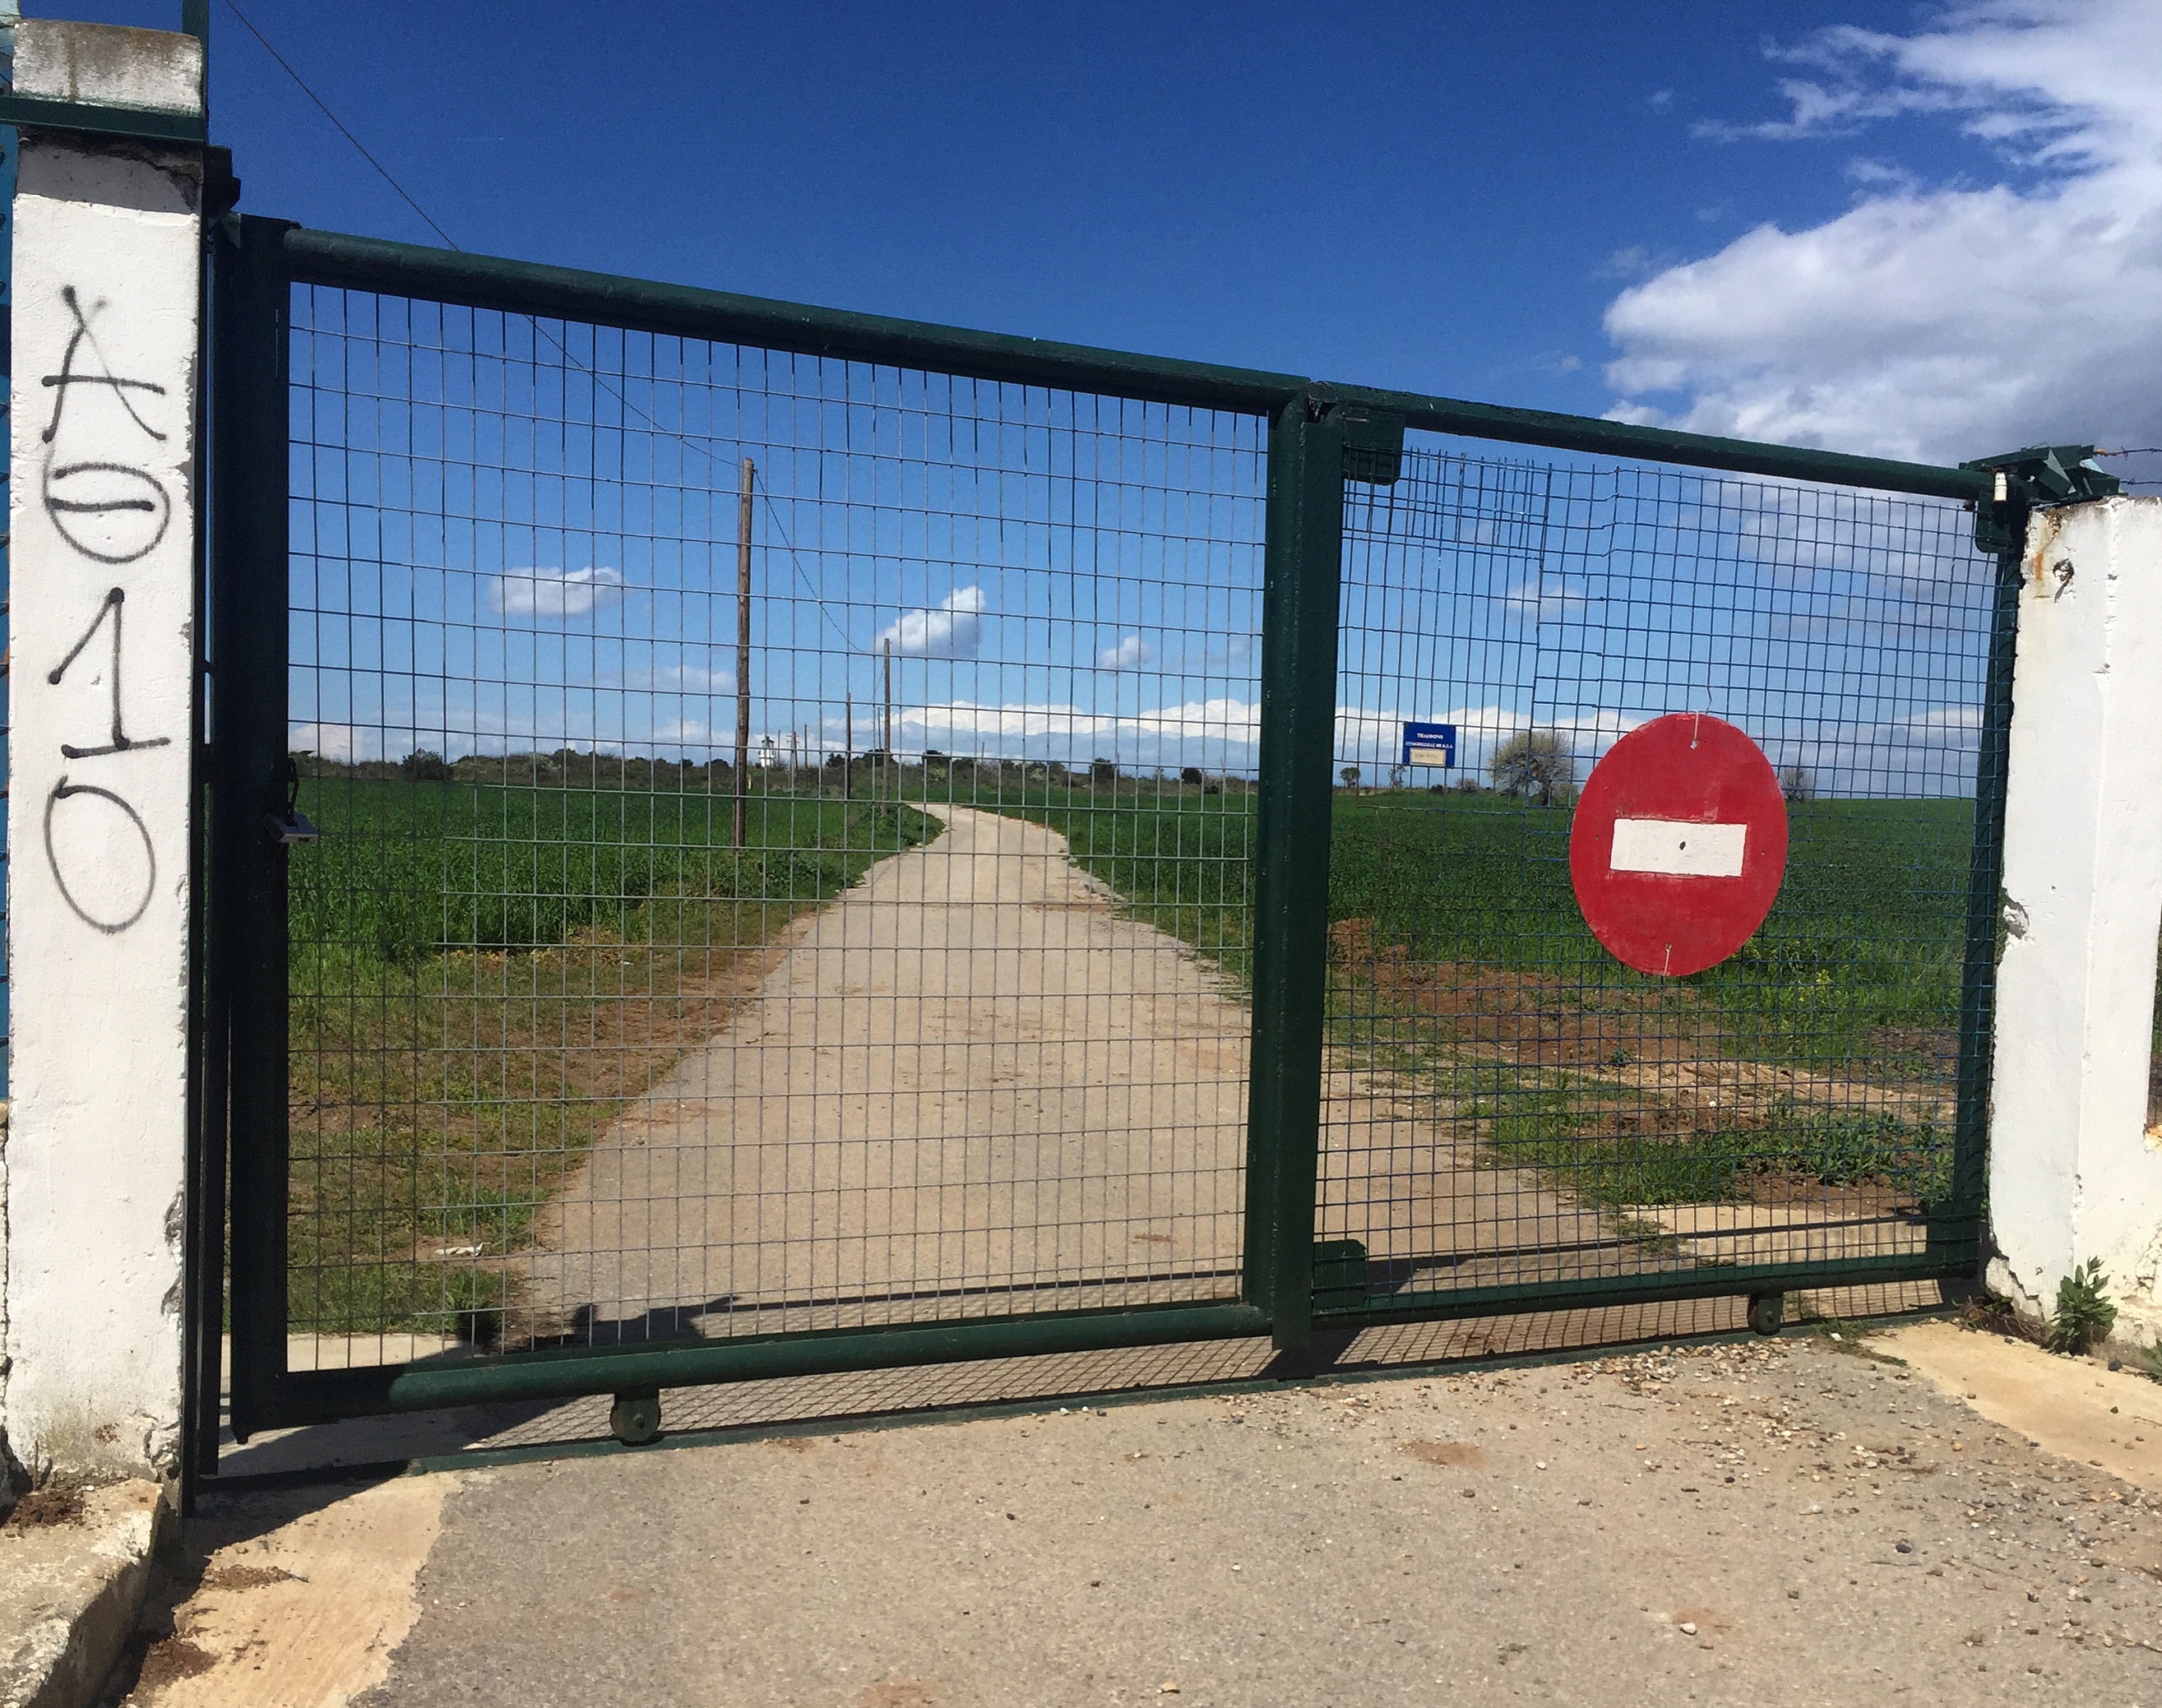 A fence with a sign indicating 'No Entry.' The image illustrates restrictions on freedom of speech and artistic expression.